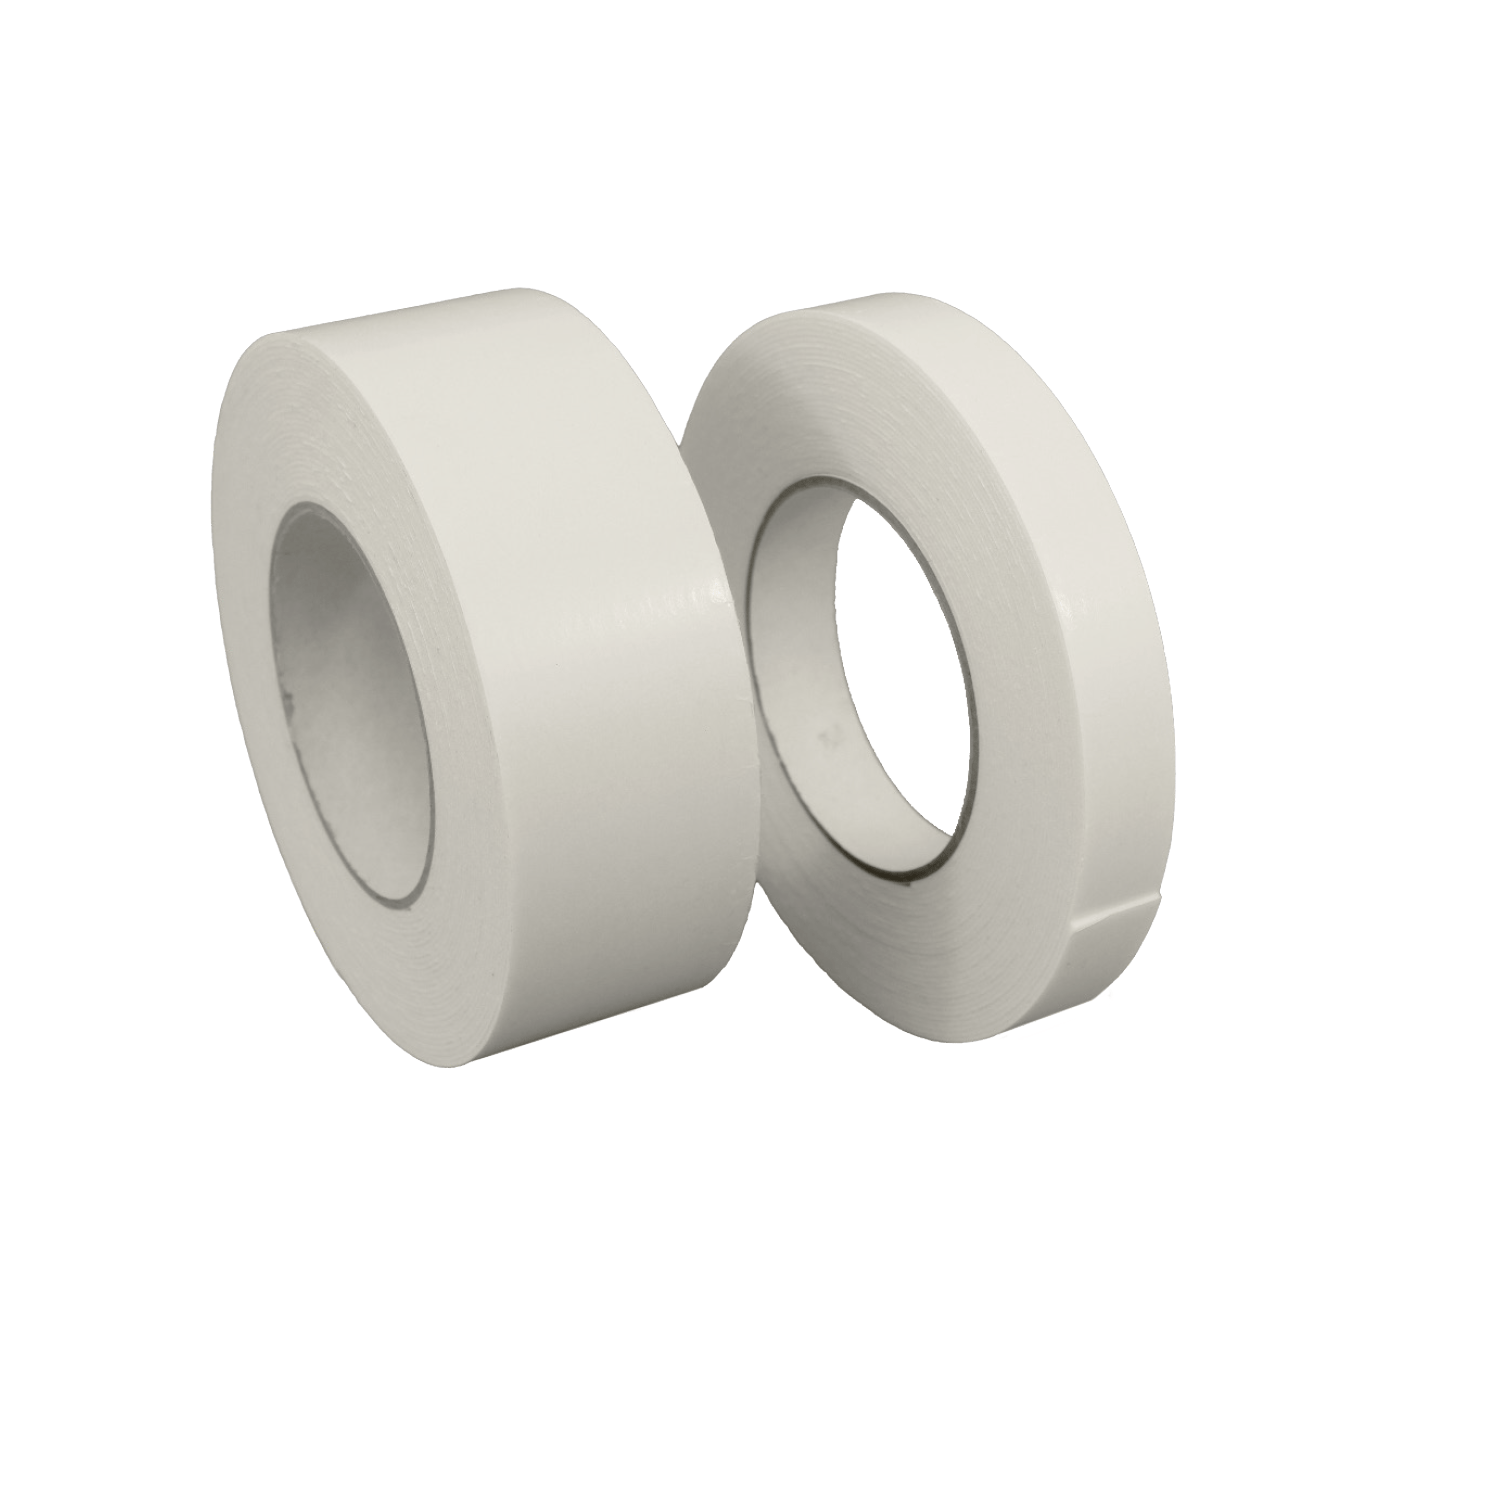 Two size variations of Foam Adhesive Tape